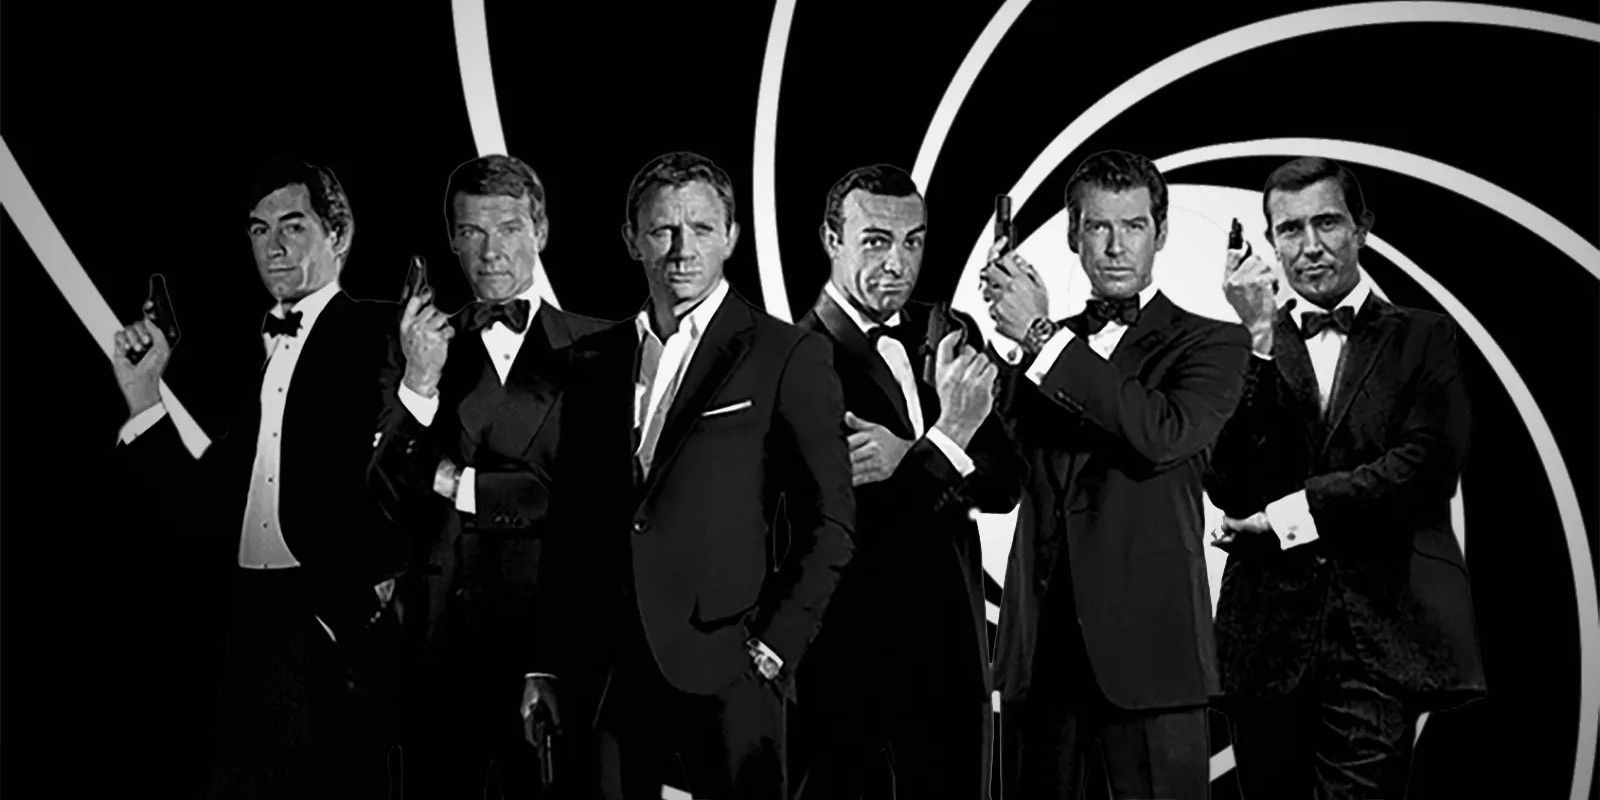 Every actor playing James Bond